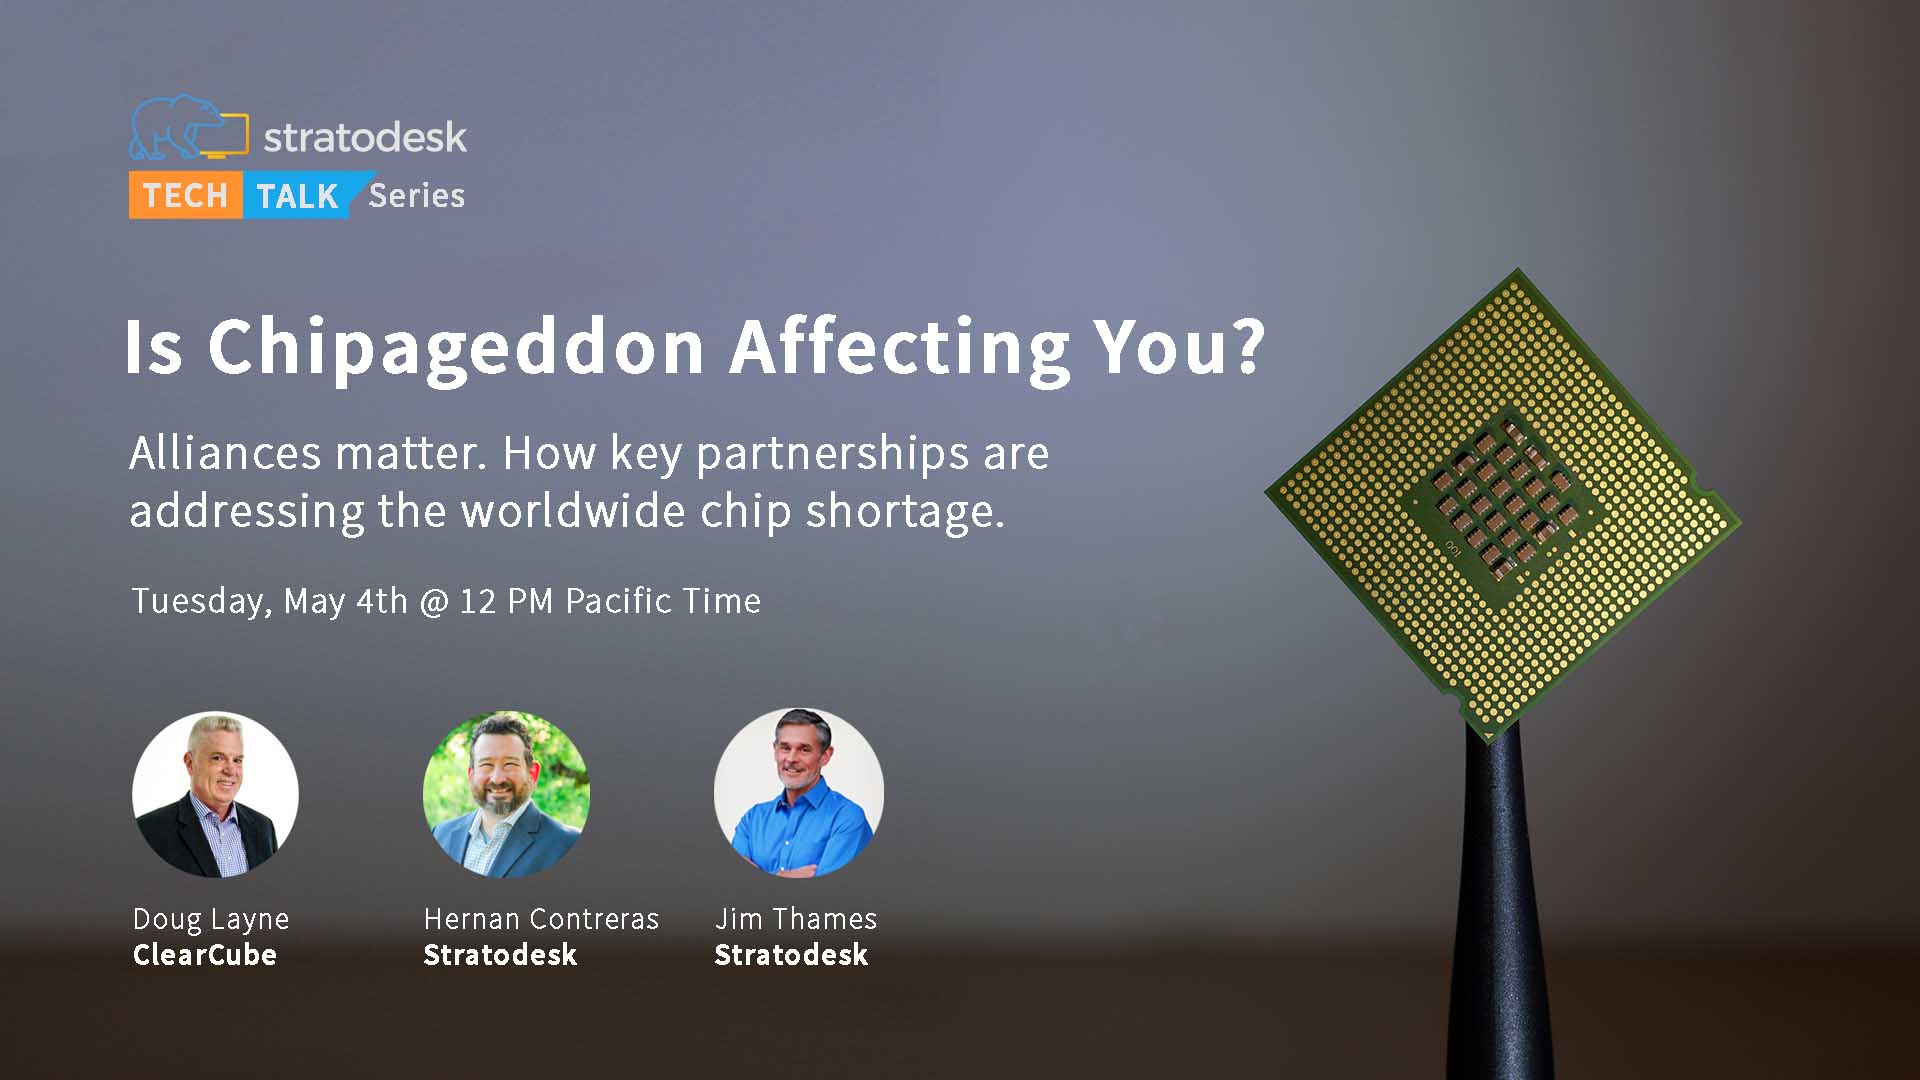 Find Out How Stratodesk and ClearCube Partner to Solve the Global Chip Shortage in our Second TechTalk.